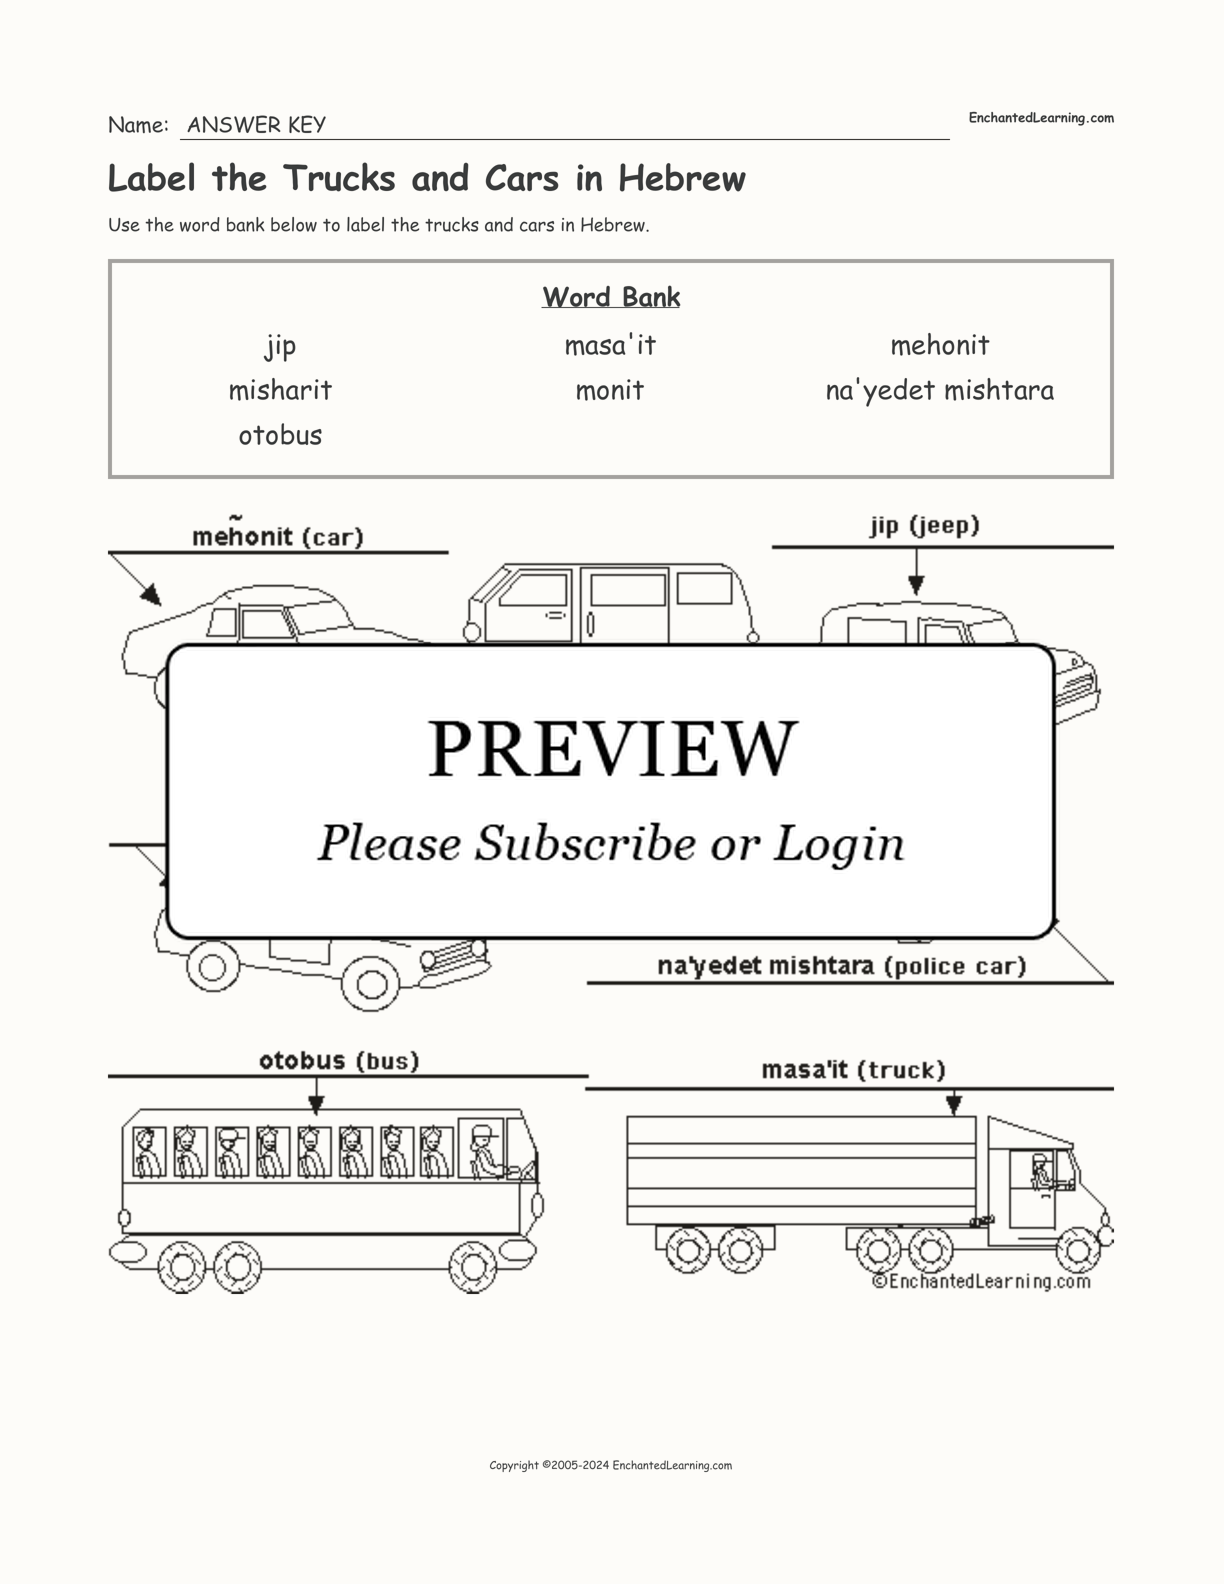 Label the Trucks and Cars in Hebrew interactive worksheet page 2